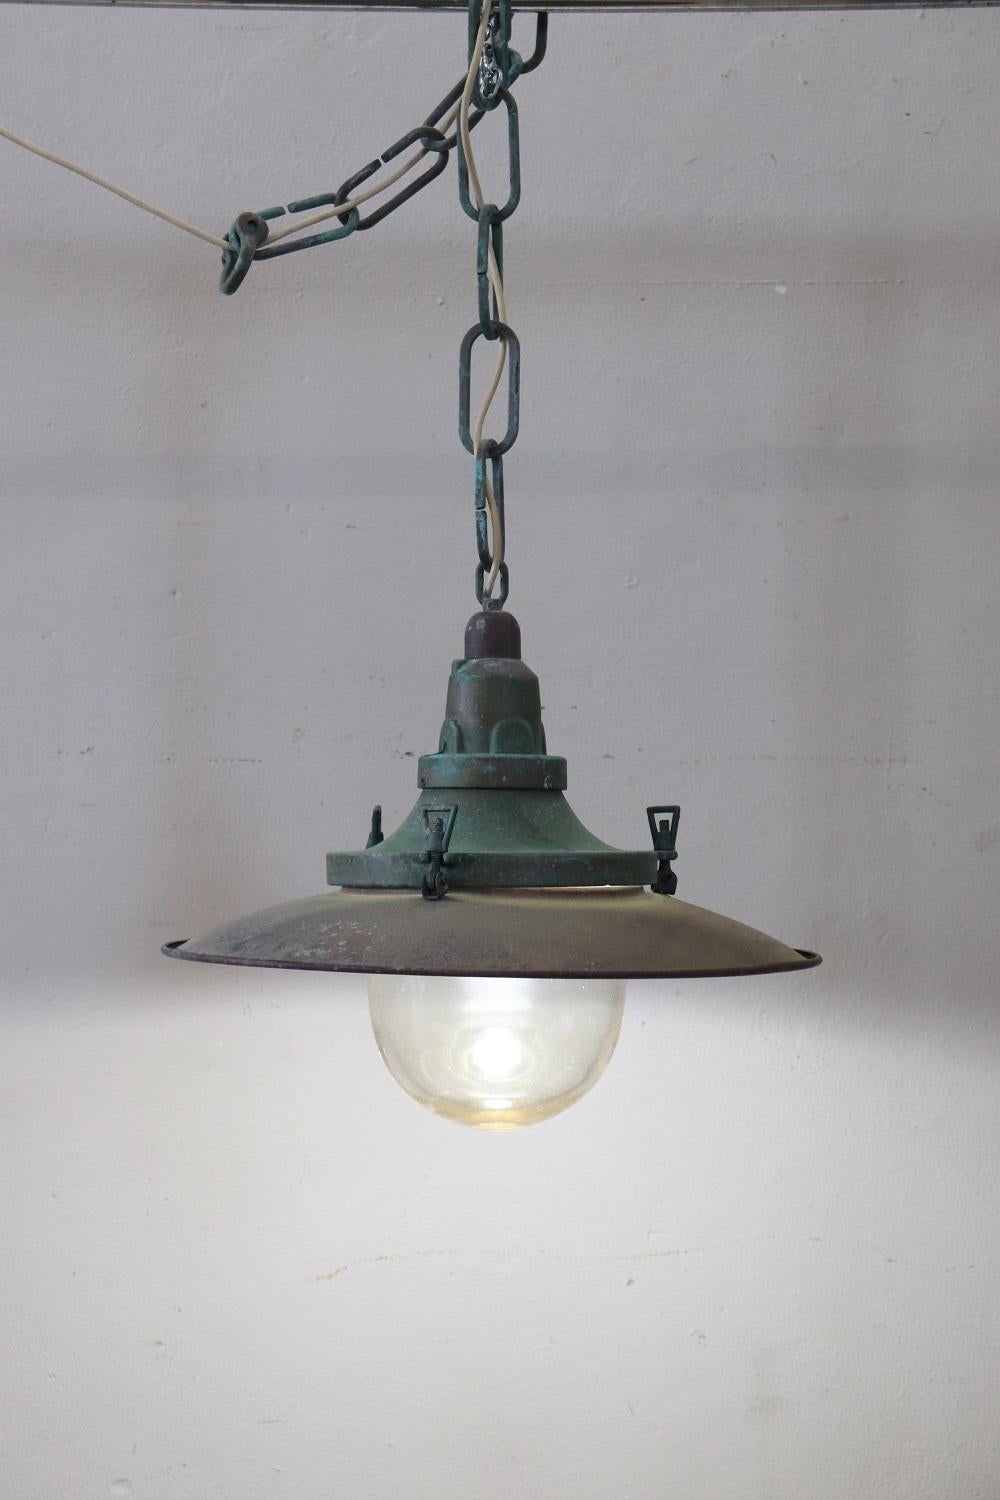 This old nautical pendant lamp from around 1920s is truly rare. Made of copper with a very thick glass that protects the bulb. The copper has oxidized over time and acquired this beautiful vintage patina. This pendant lamp can be changed in its